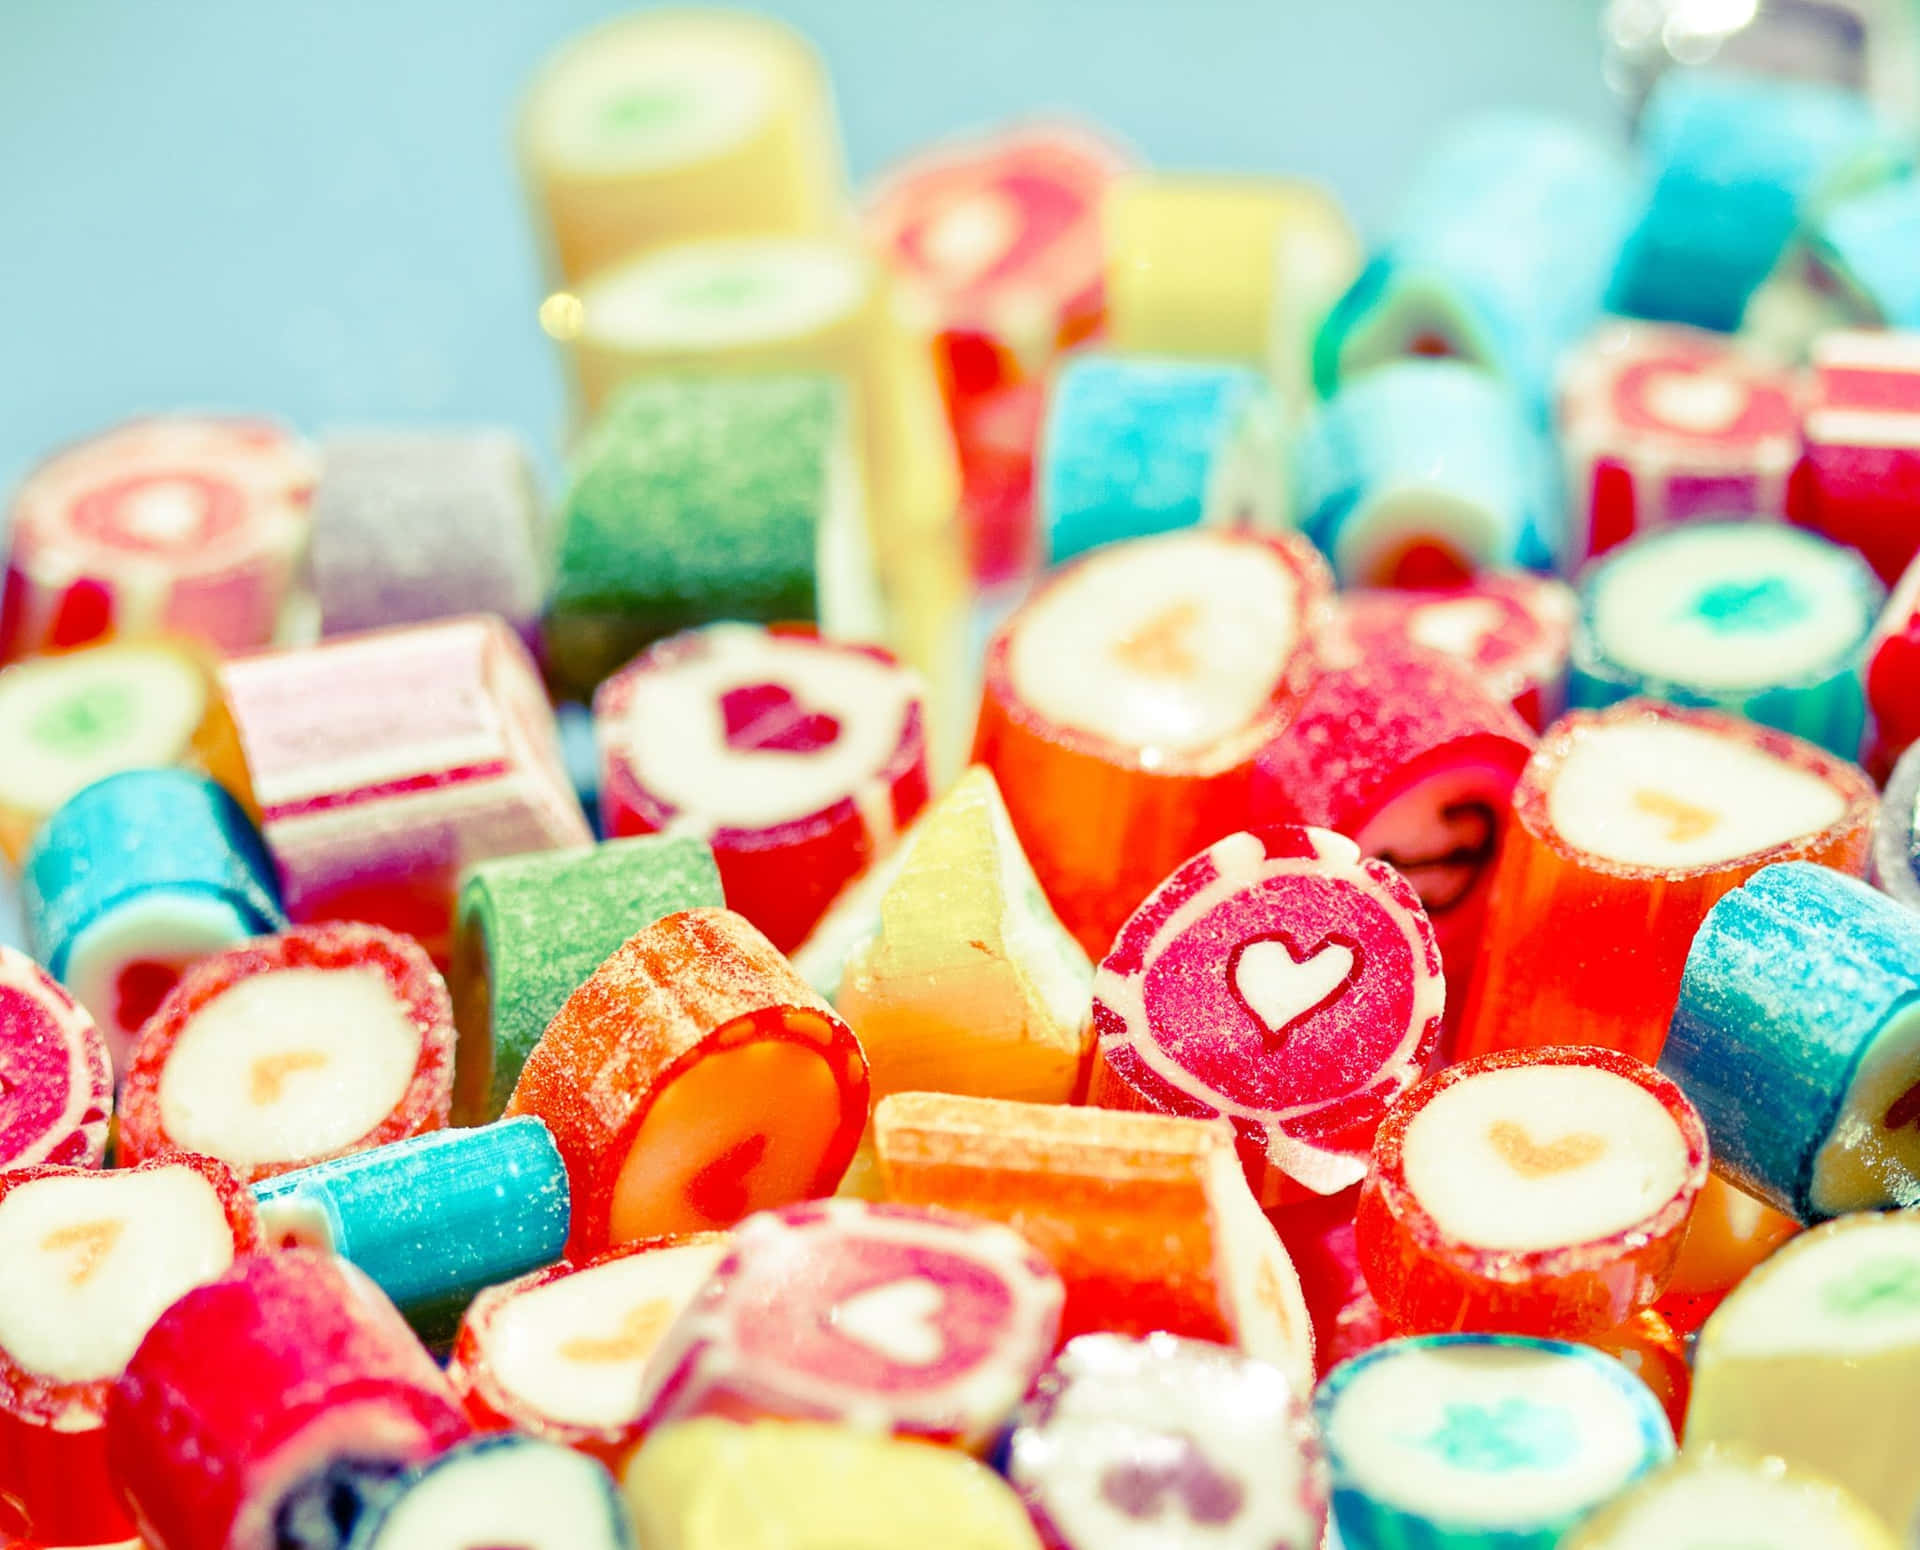 Enjoy your sweet treats with a delightful Candy background.